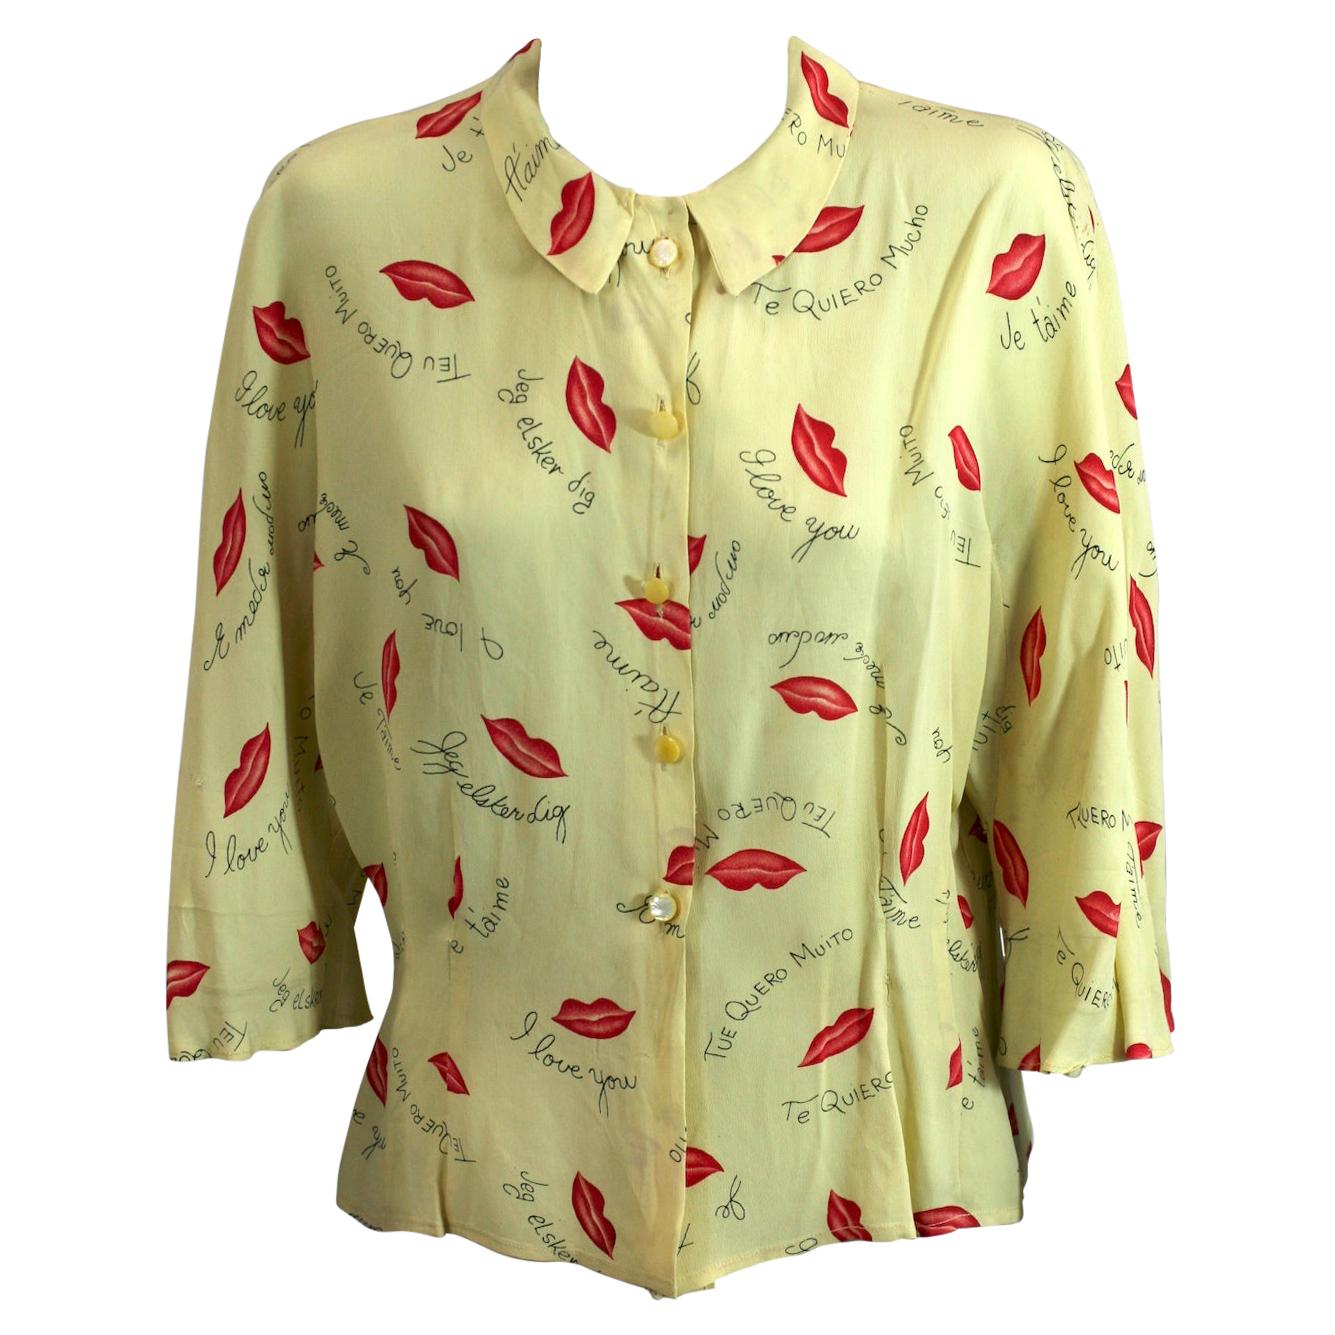 Charming Figural Lips And Love Sayings Printed Blouse